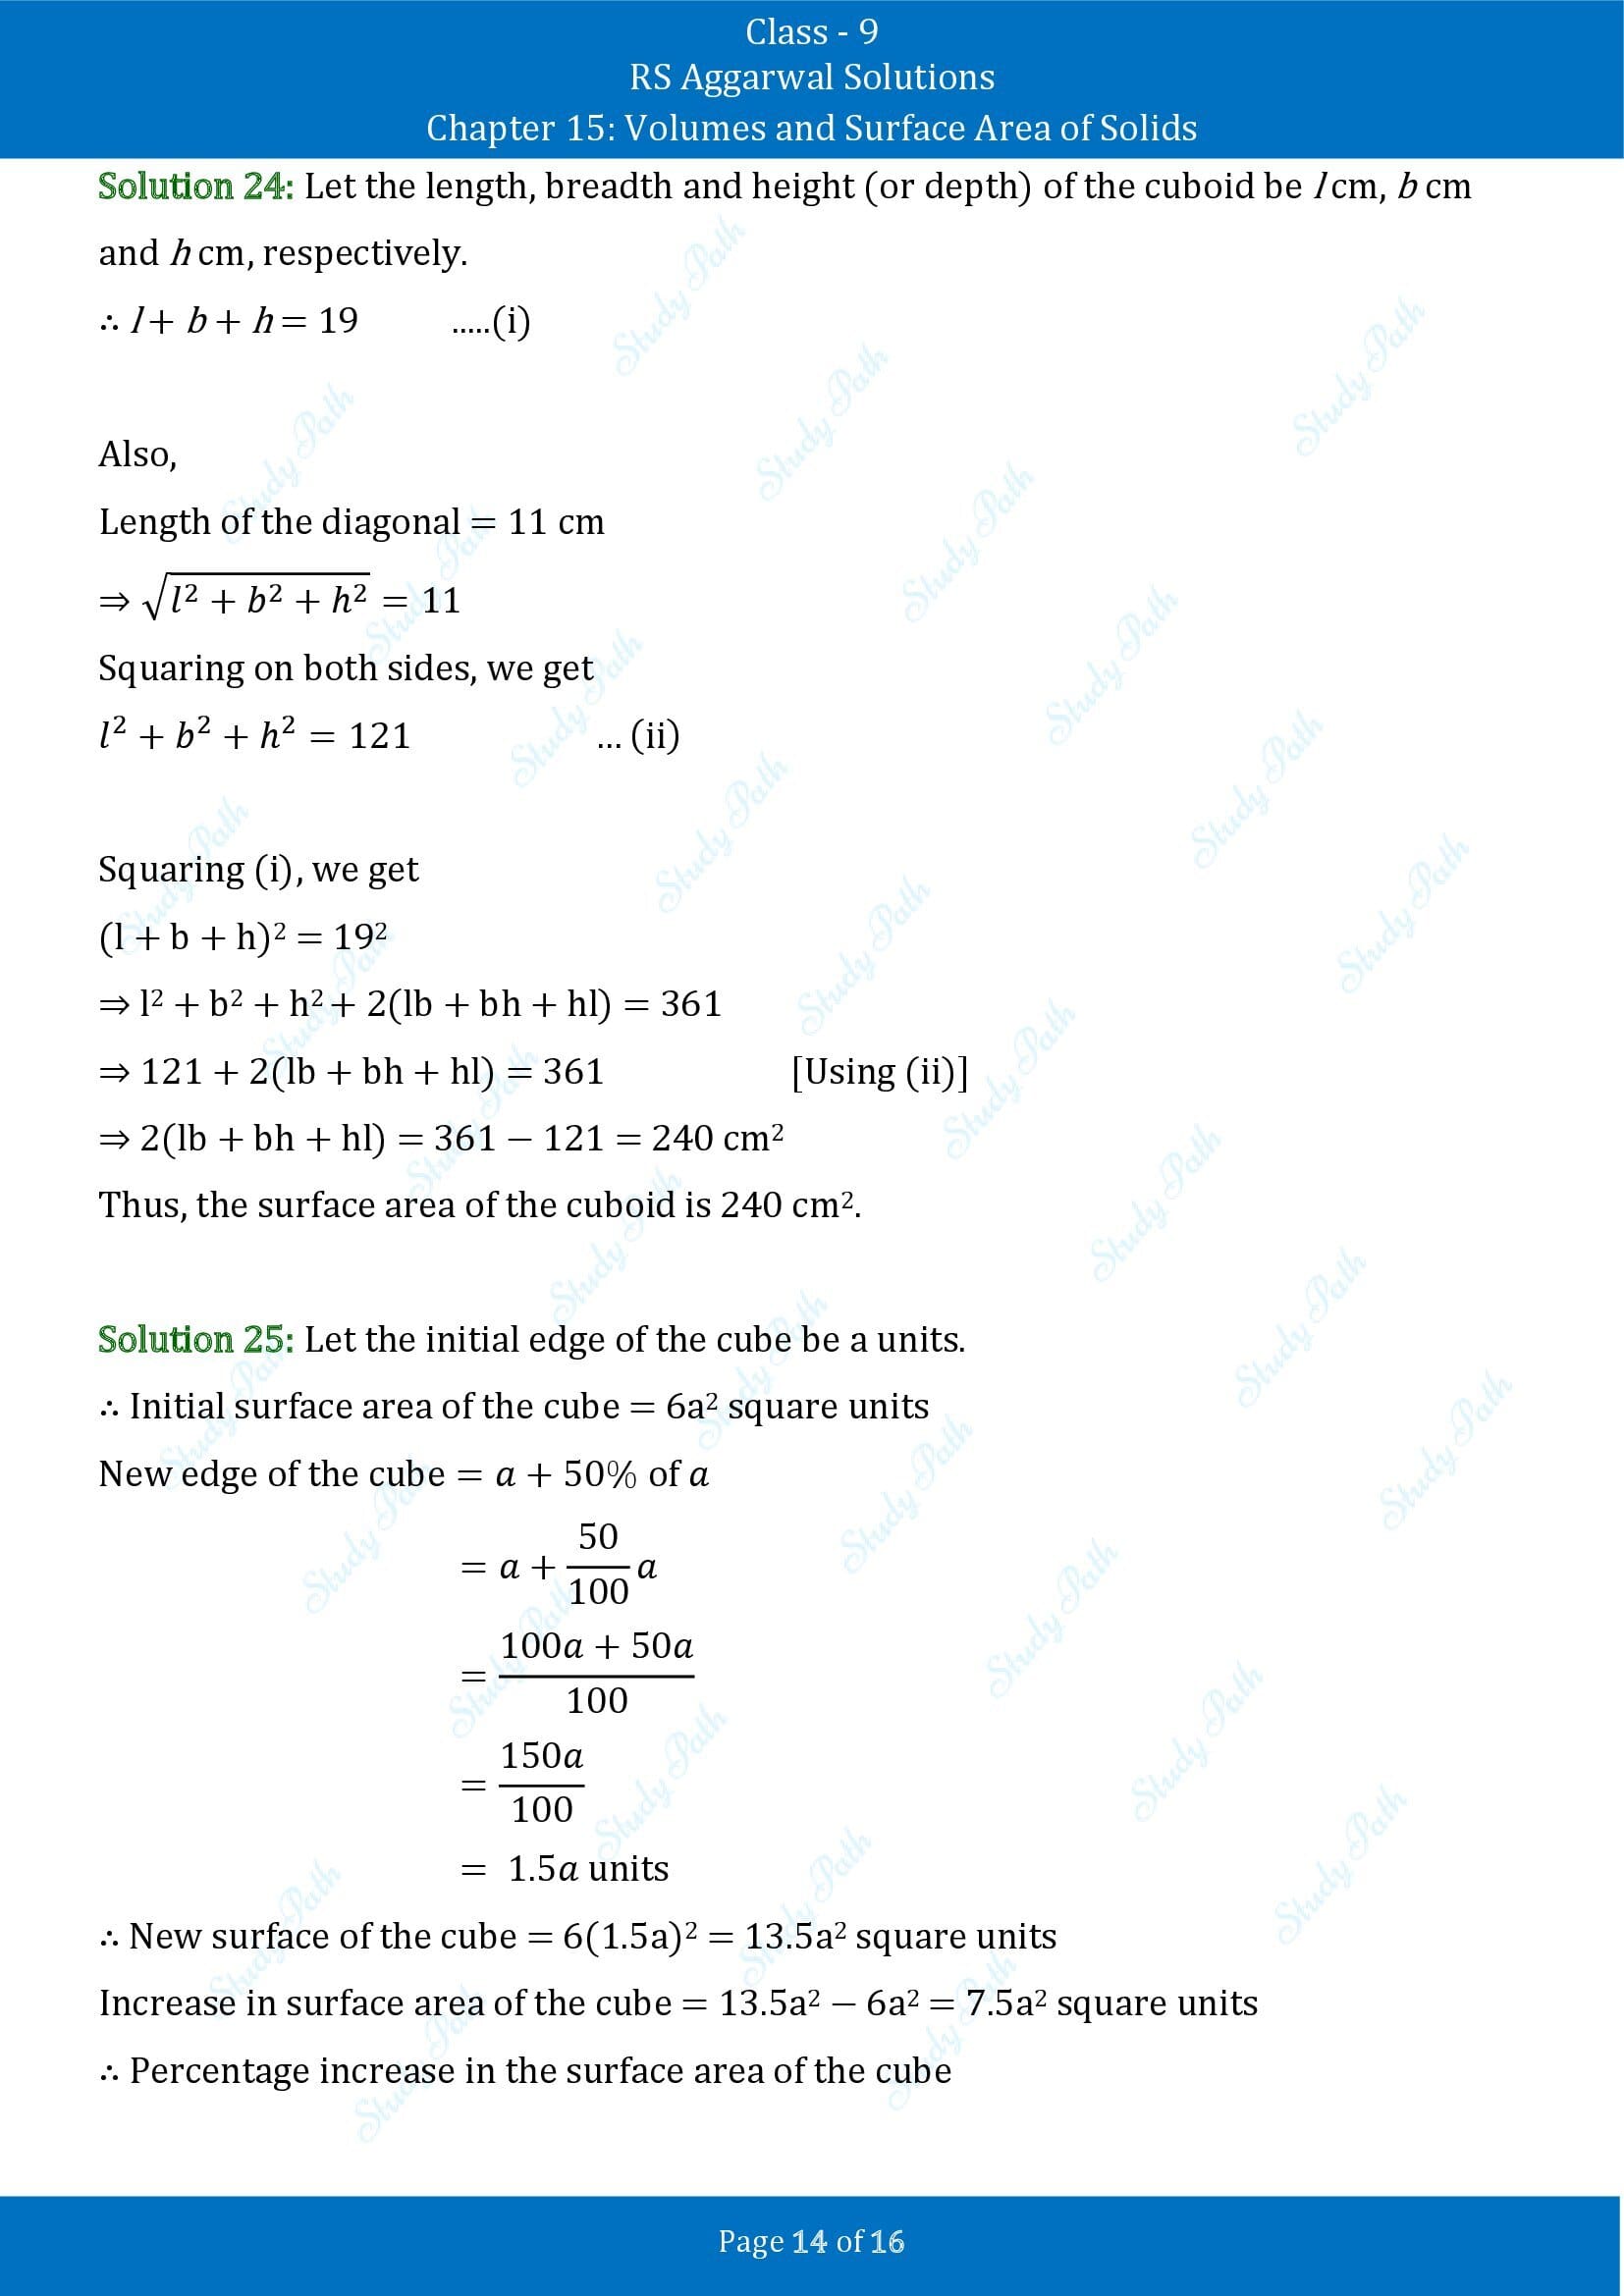 RS Aggarwal Solutions Class 9 Chapter 15 Volumes and Surface Area of Solids Exercise 15A 00014